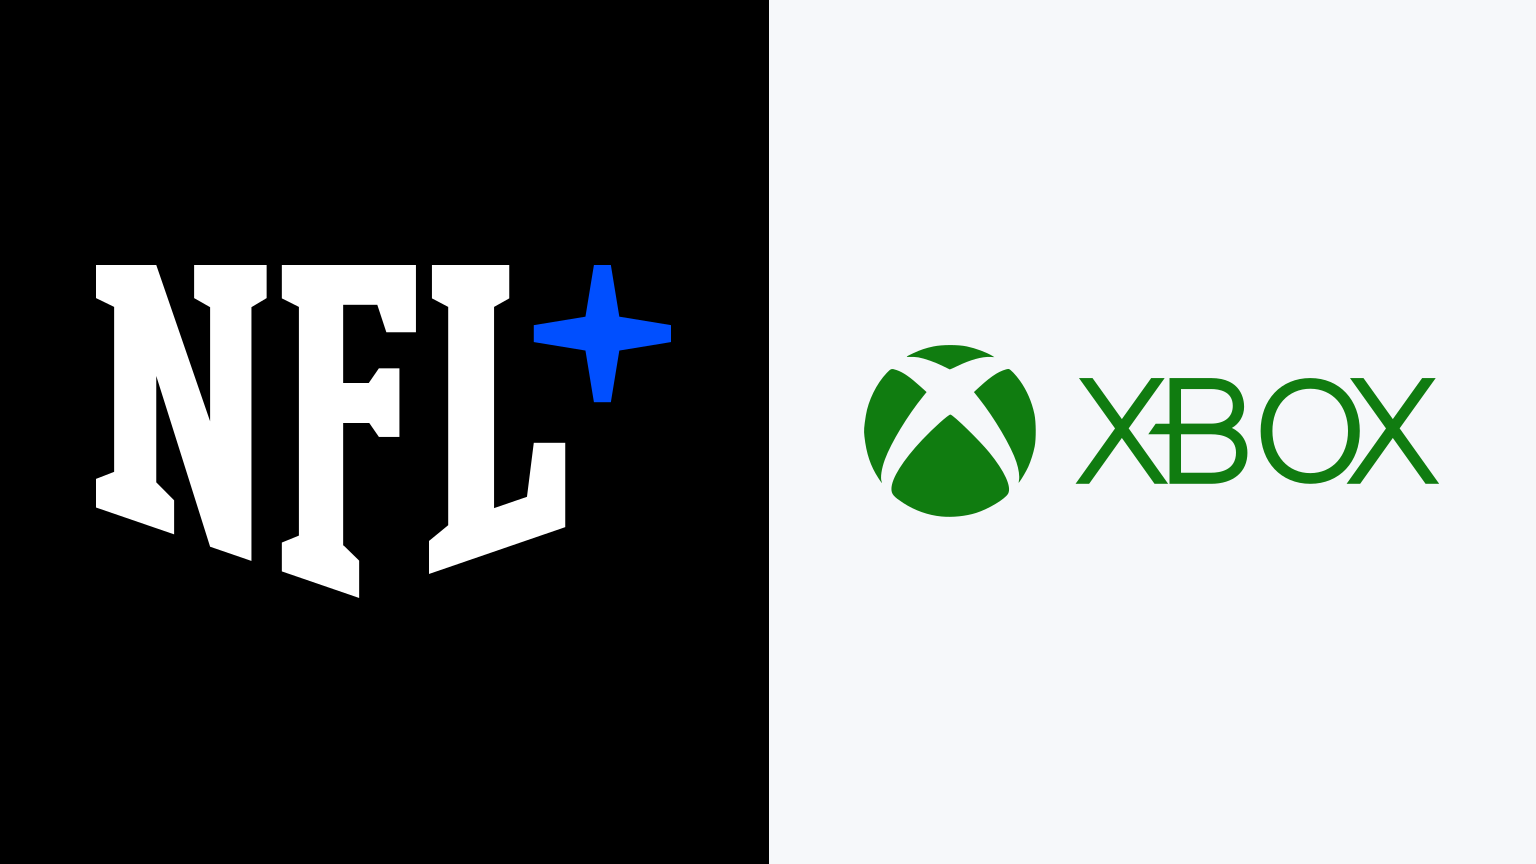 How To Stream Nfl Games On Xbox One?